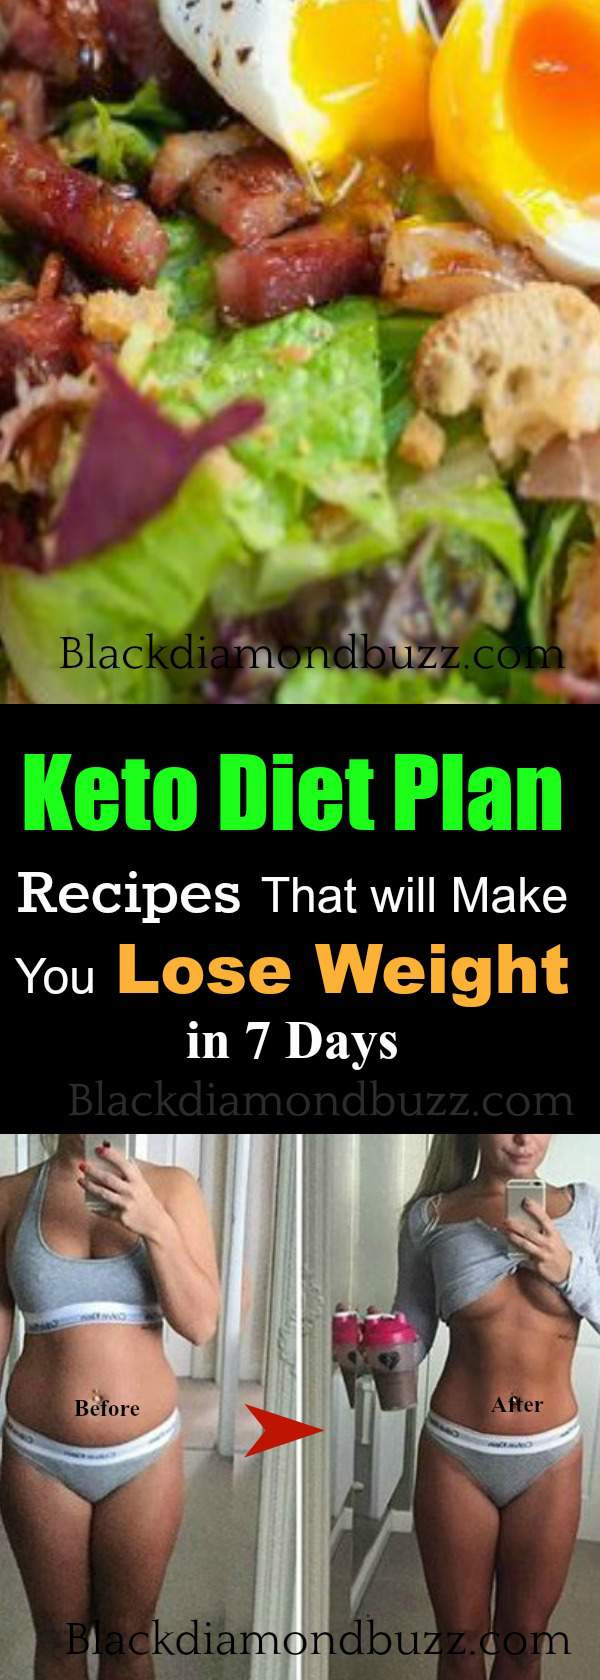 Ketogenic Diet Recipes Weight Loss
 Keto Diet Plan Recipes That Will Make You Lose Weight in 7